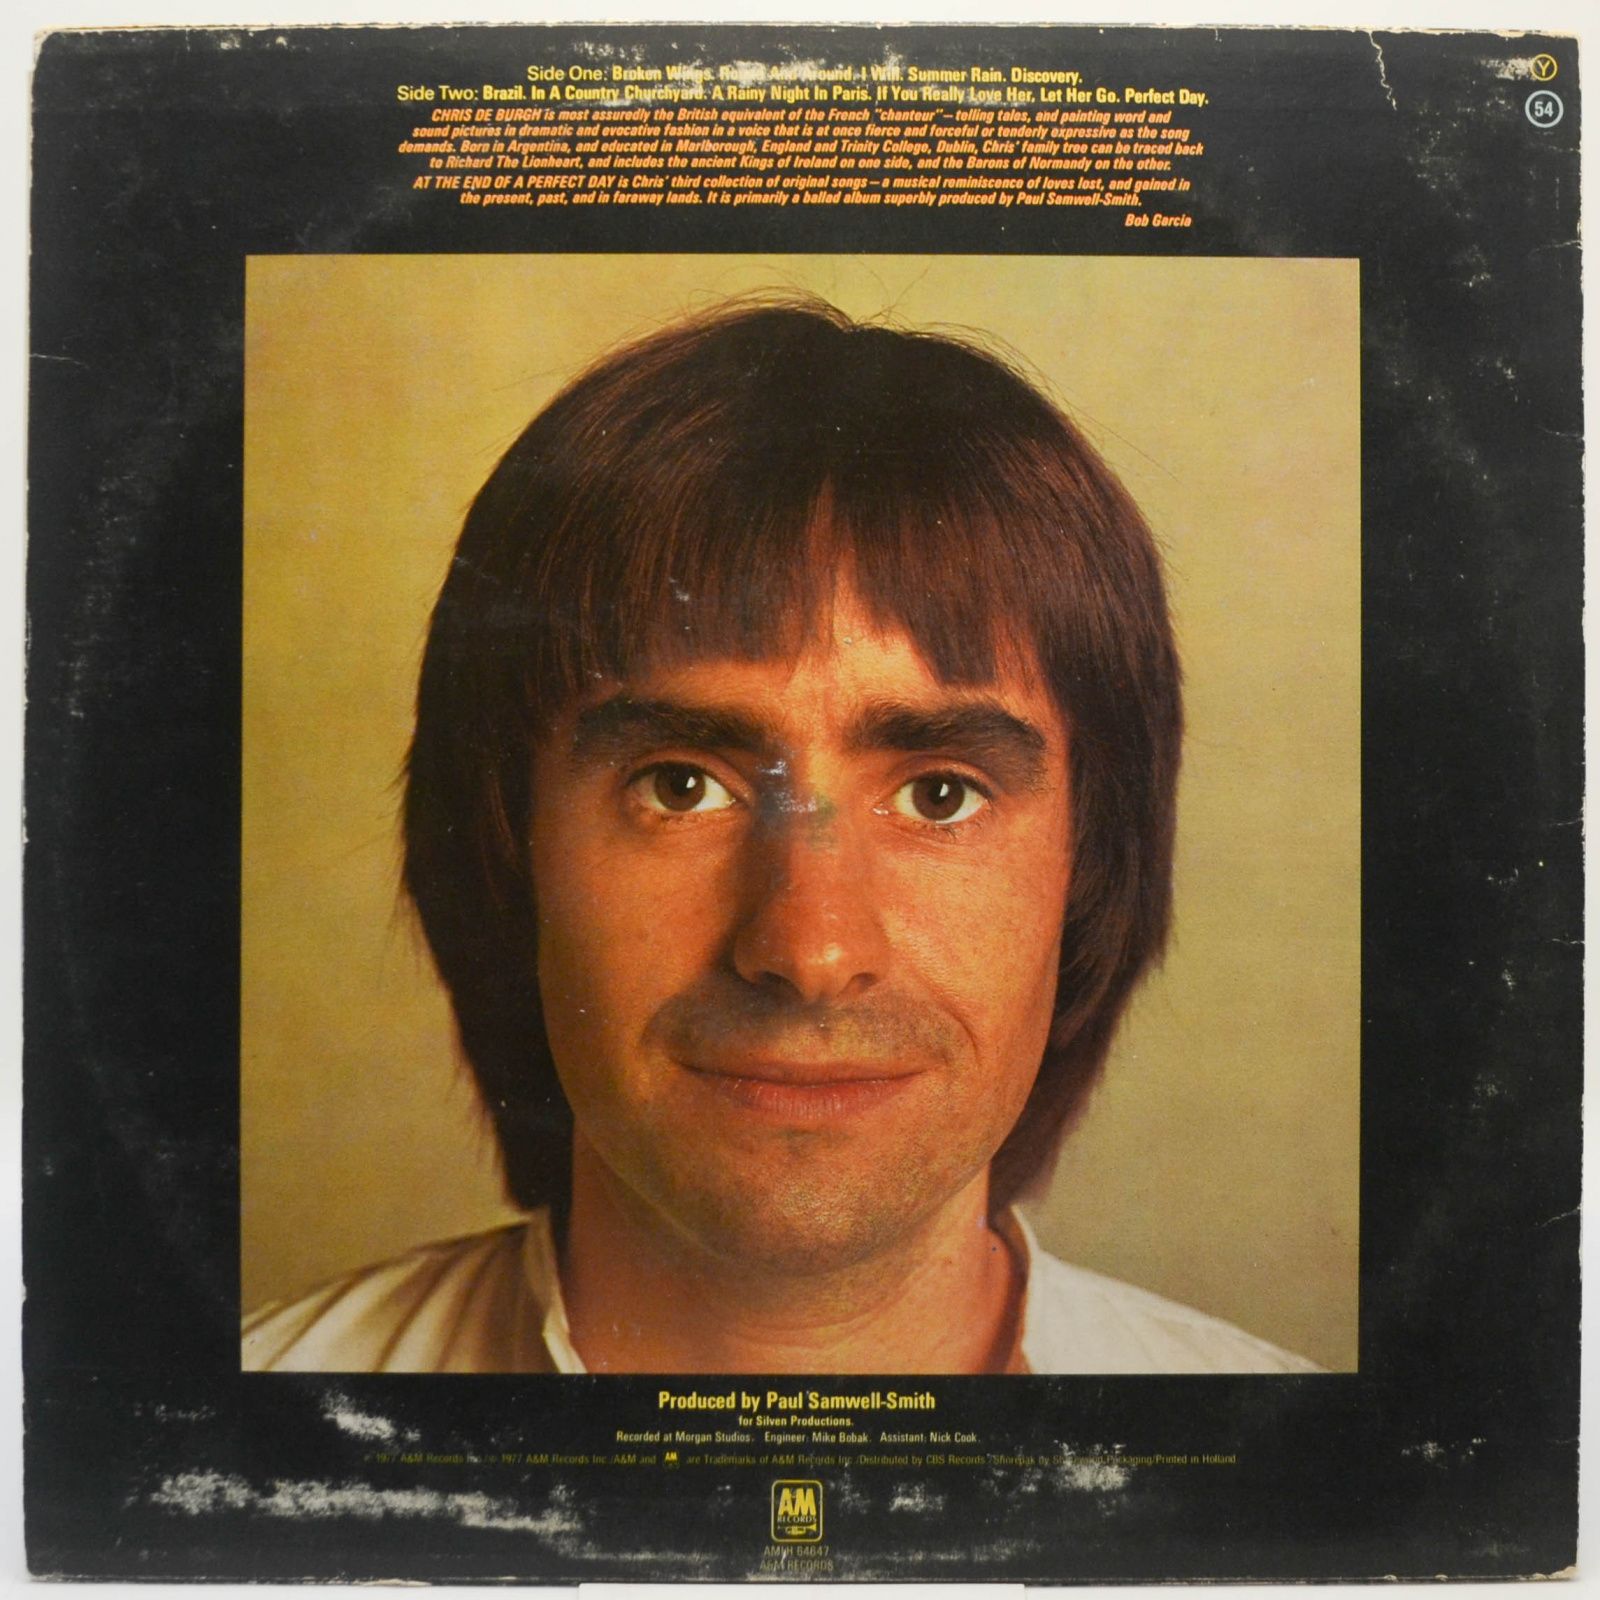 Chris de Burgh — At The End Of A Perfect Day, 1977